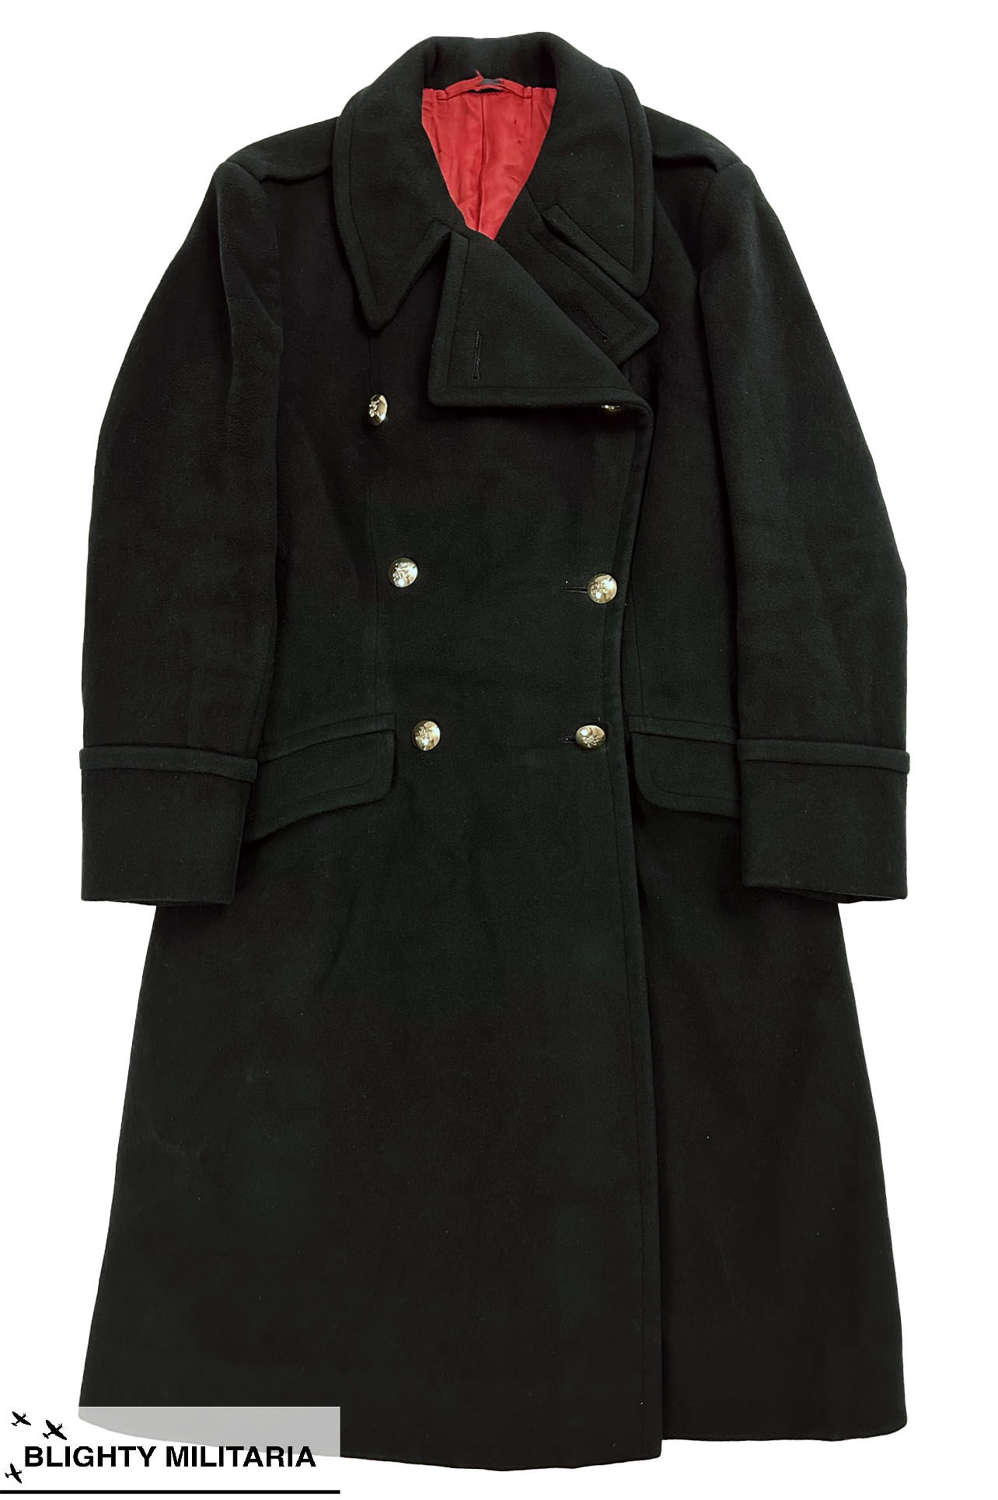 Original 1950s Women's Royal Army Corps Crombie Greatcoat